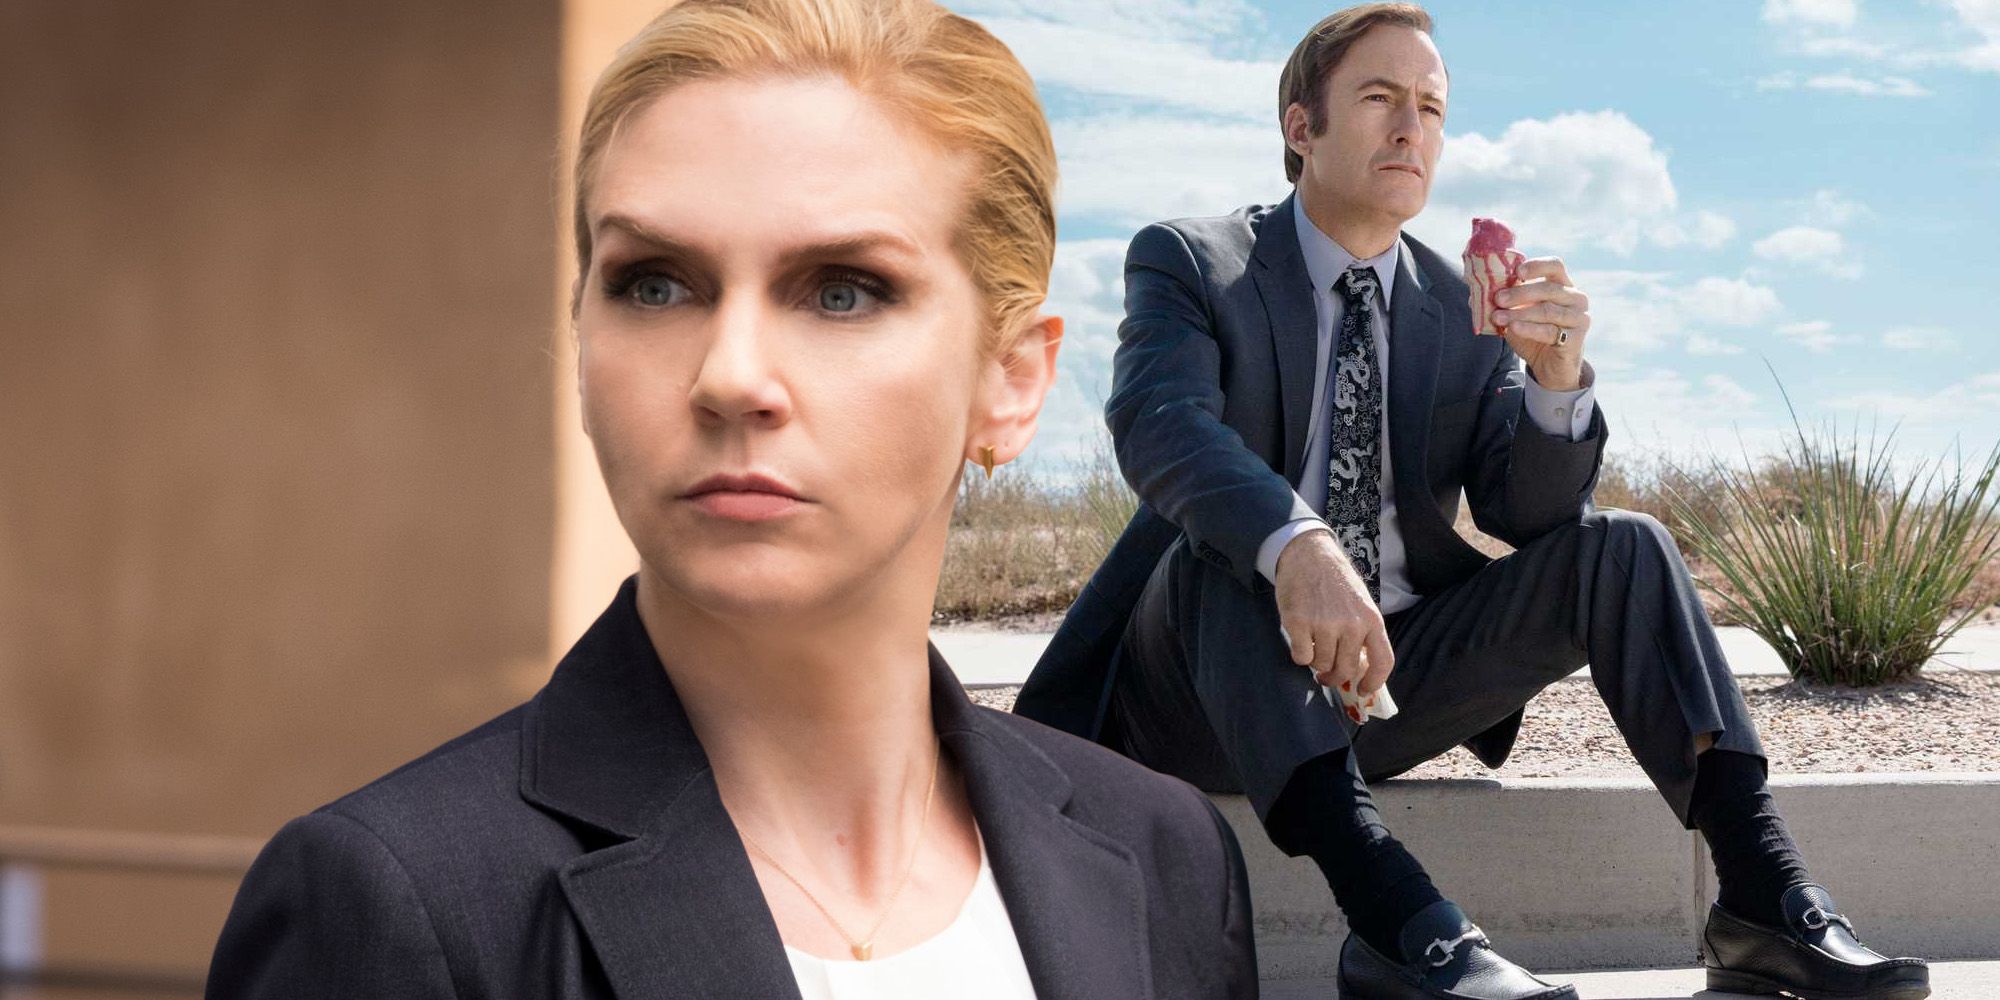 Better call saul before it ends